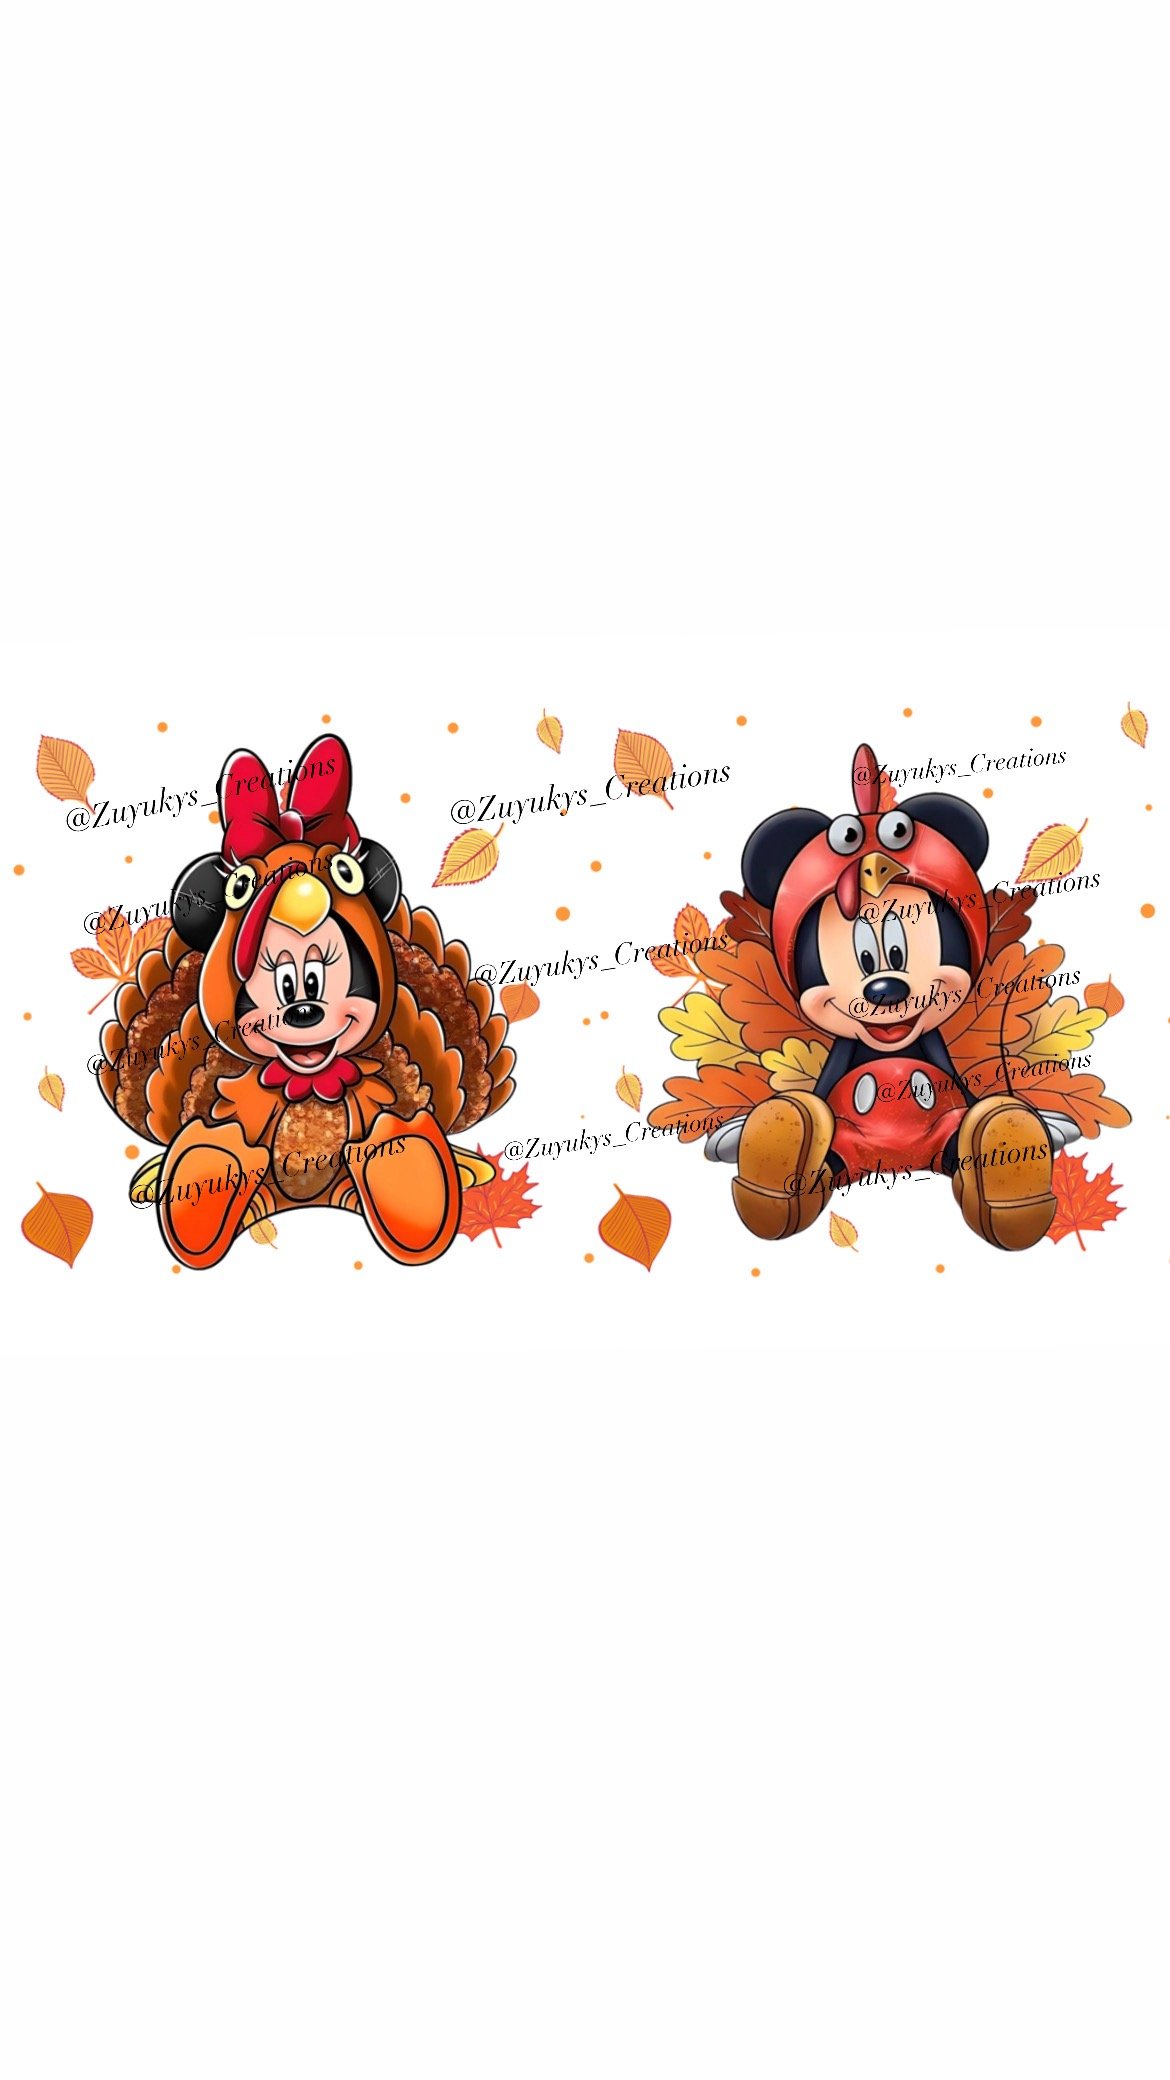 https://assets.bigcartel.com/product_images/3ae8d258-271a-4b7e-8051-4565ab30cab5/mickey-n-minnie-turkeyween-uvdtf-wrap.jpg?auto=format&fit=max&w=1200